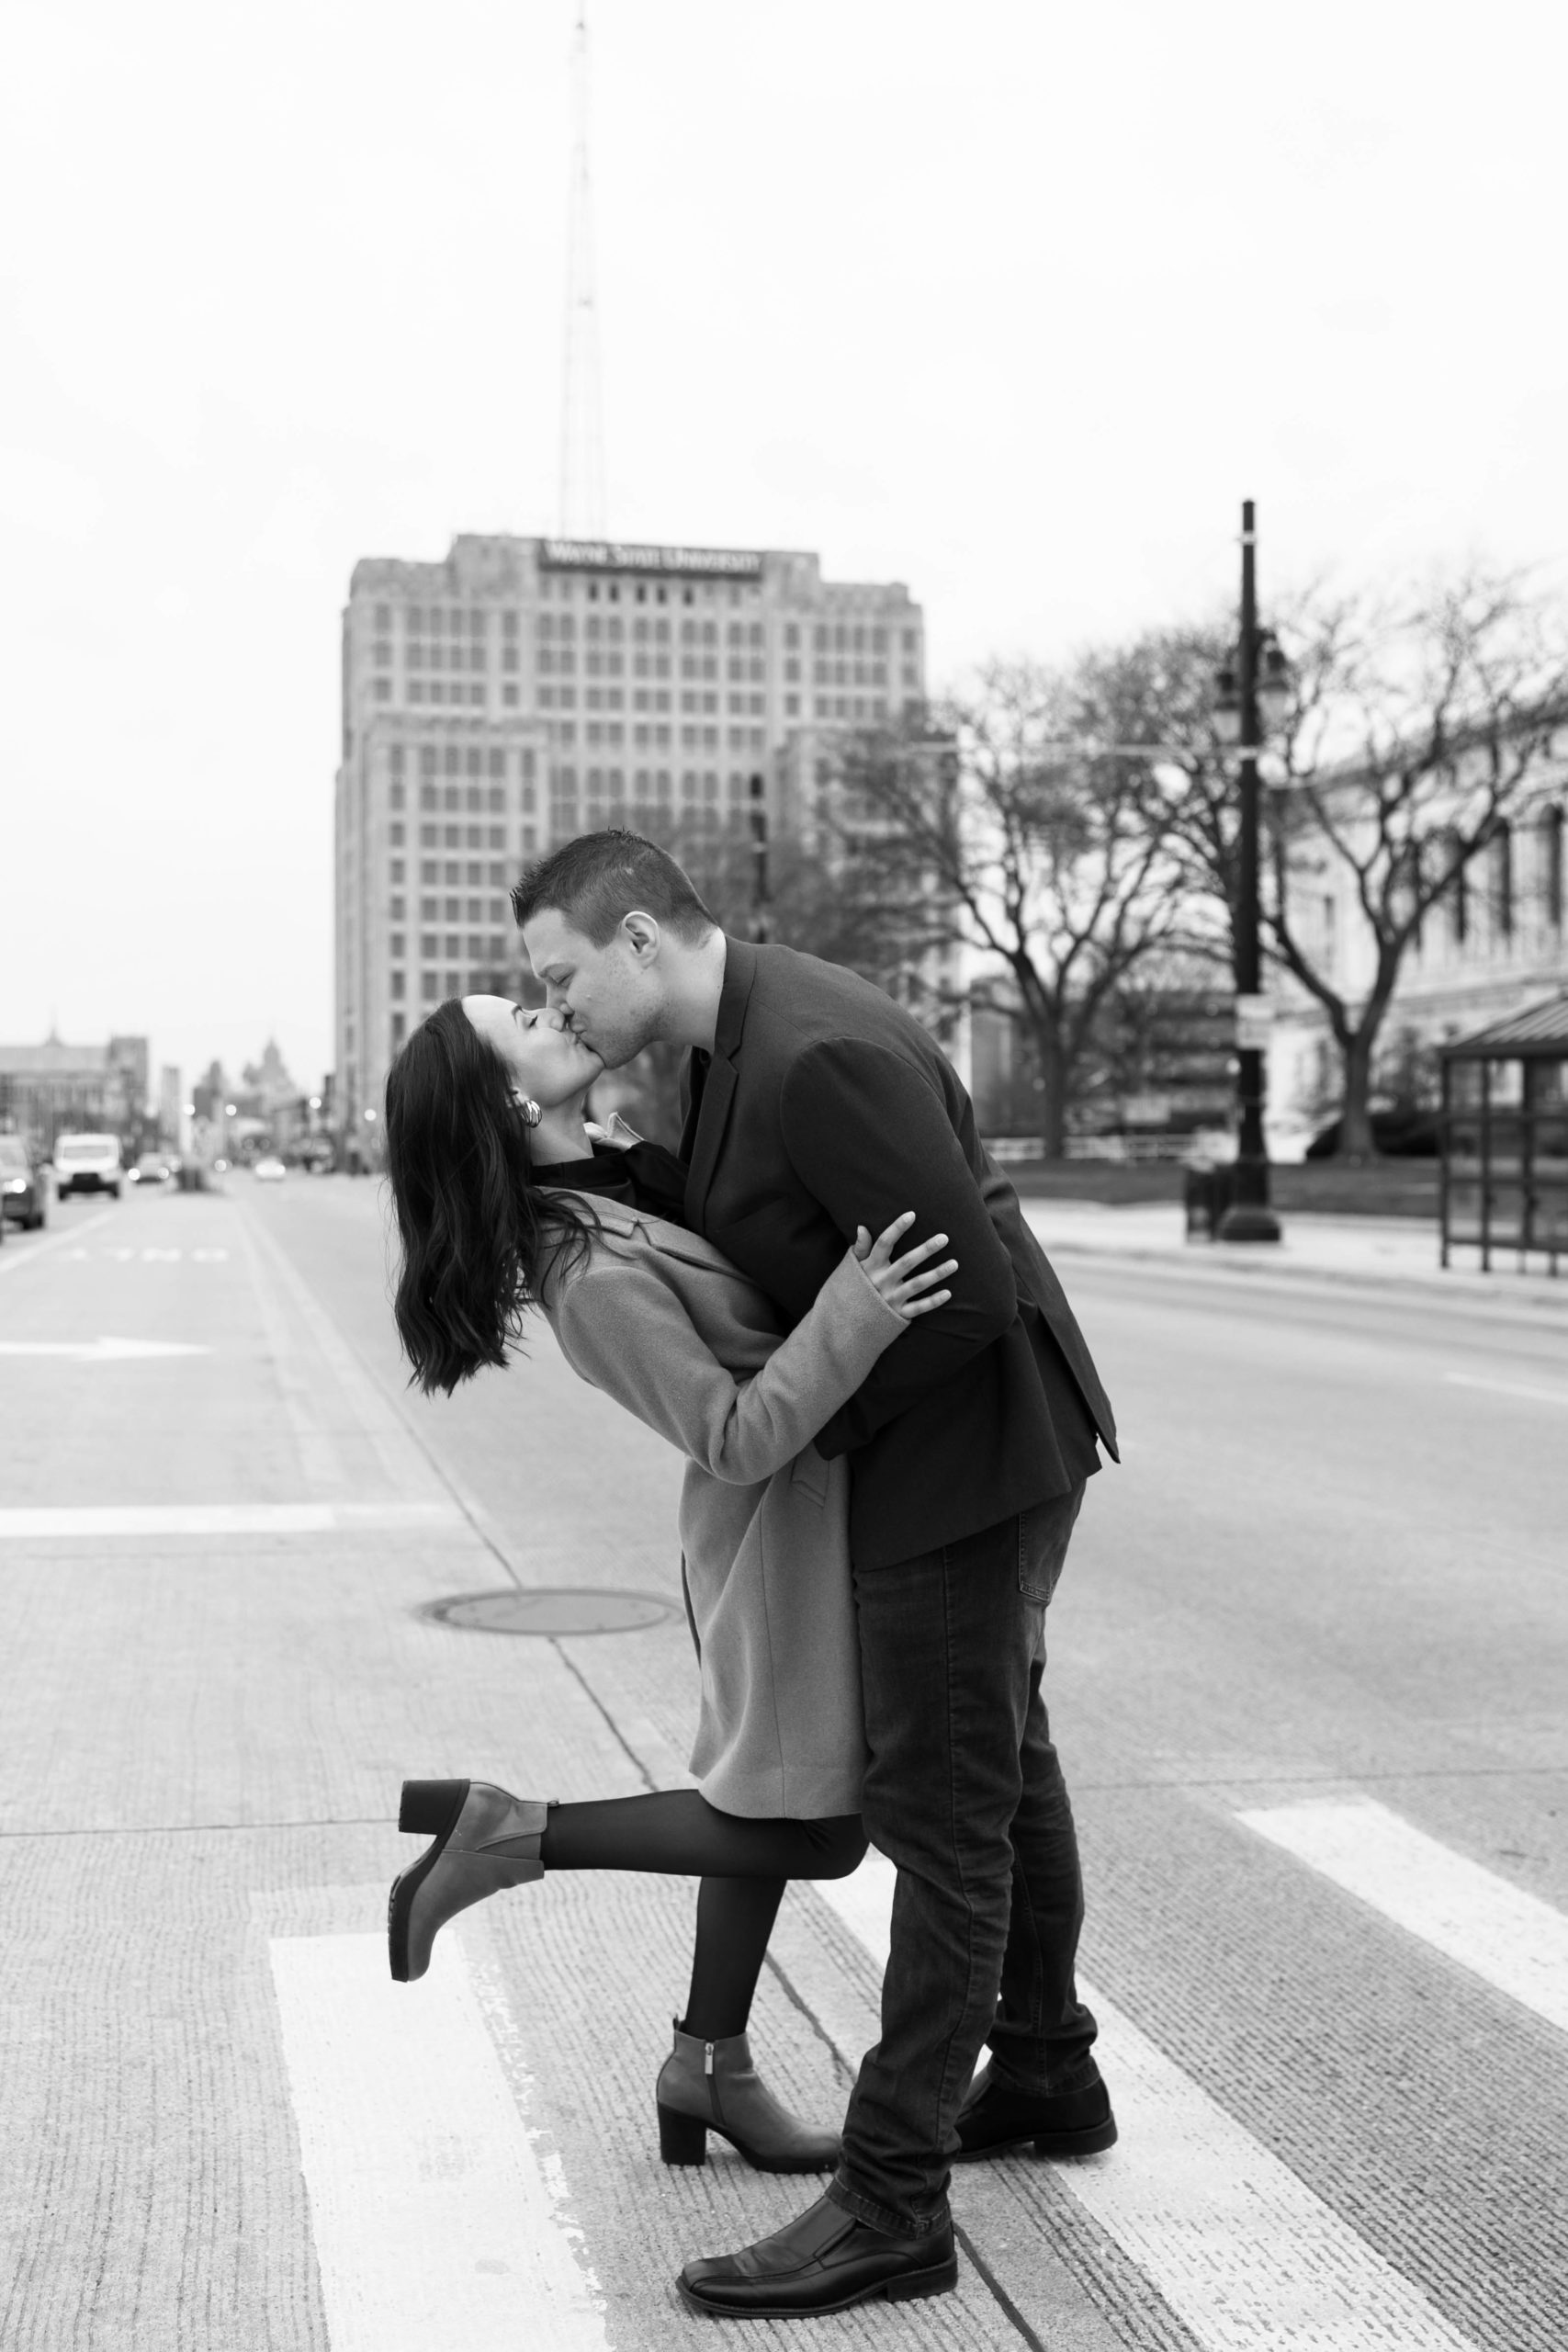 man and woman who appear to be engaged kiss in the street